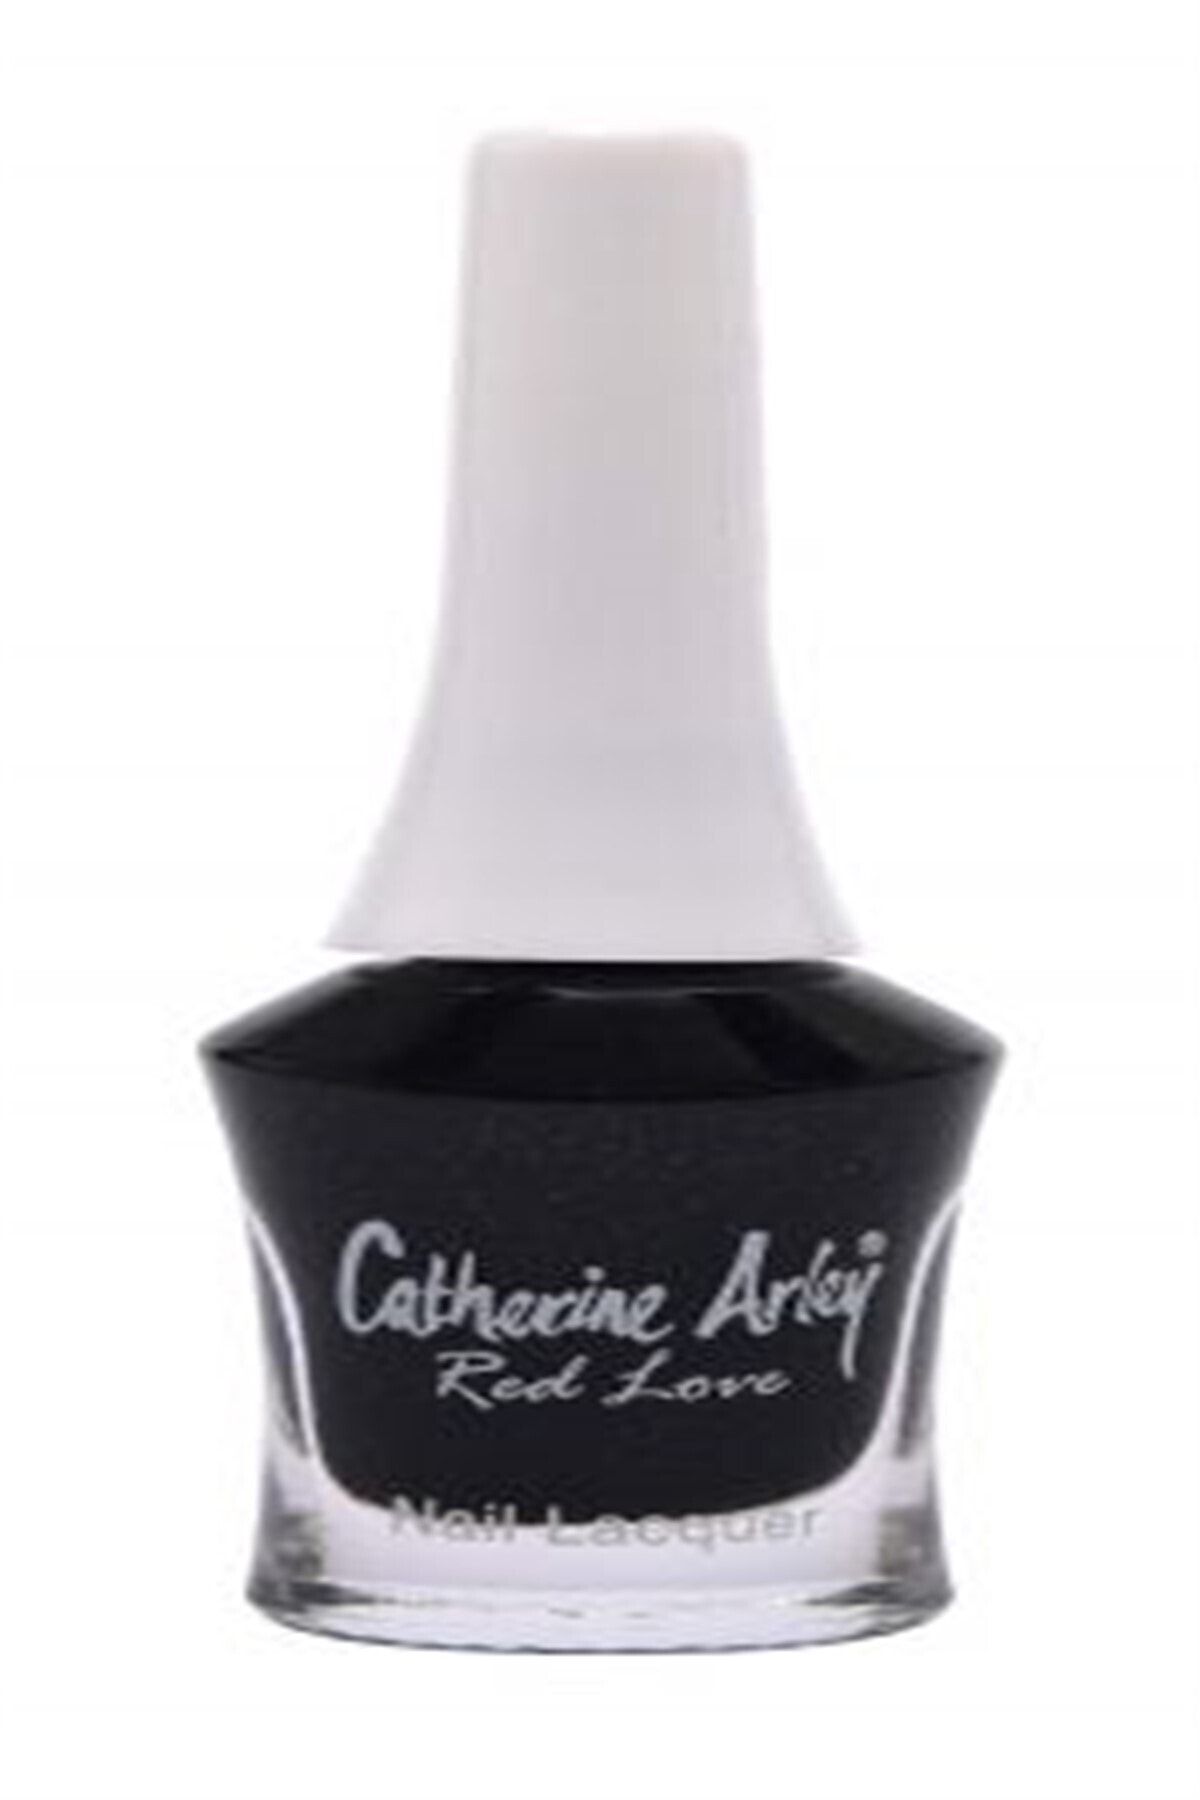 Catherine Arley Red Love Nail Lacquer (red Love Oje) - 1515/57